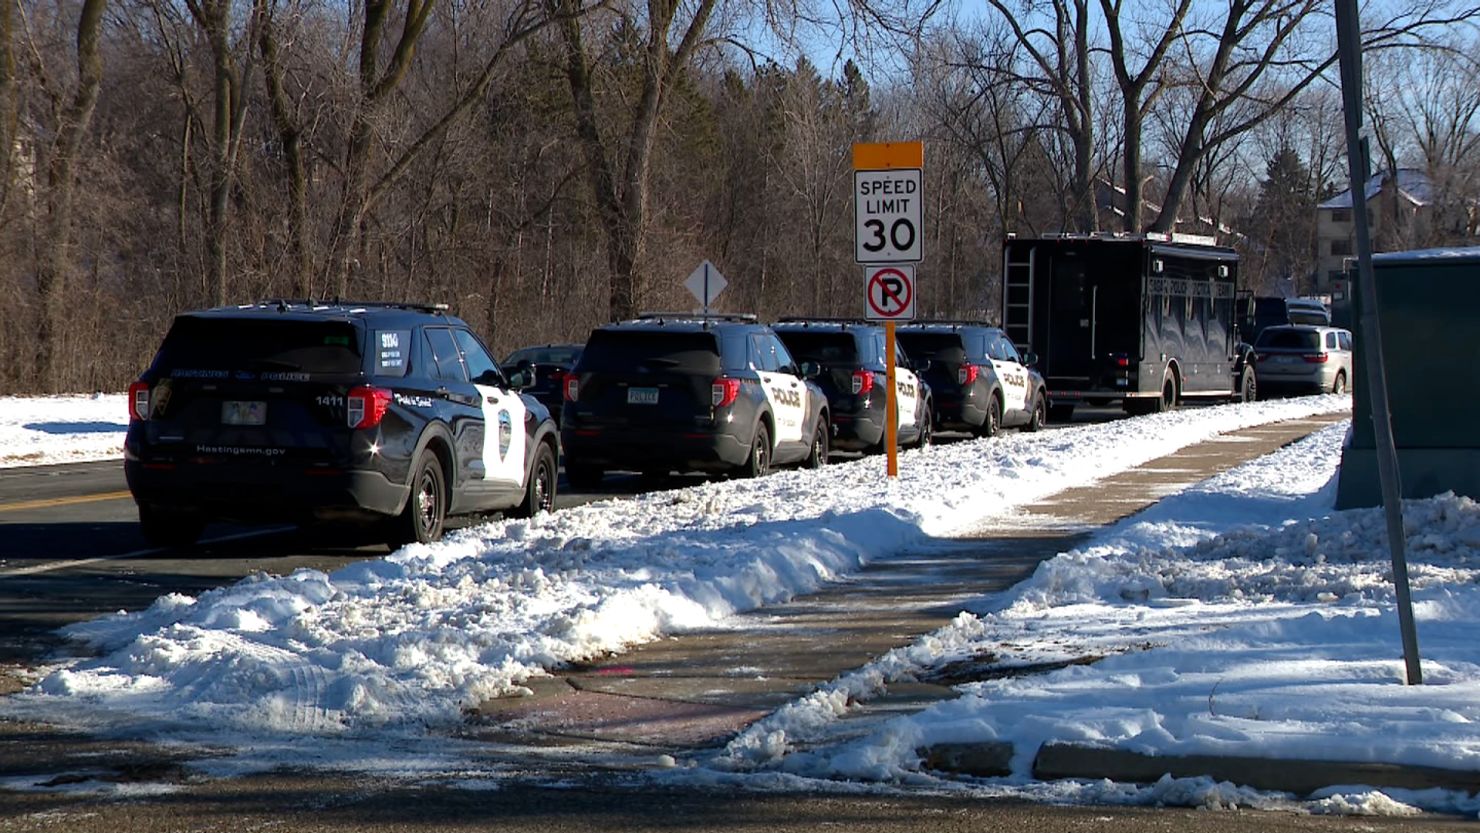 Police vehicles line the scene of a shooting incident on February 18 in Burnsville, Minnesota.